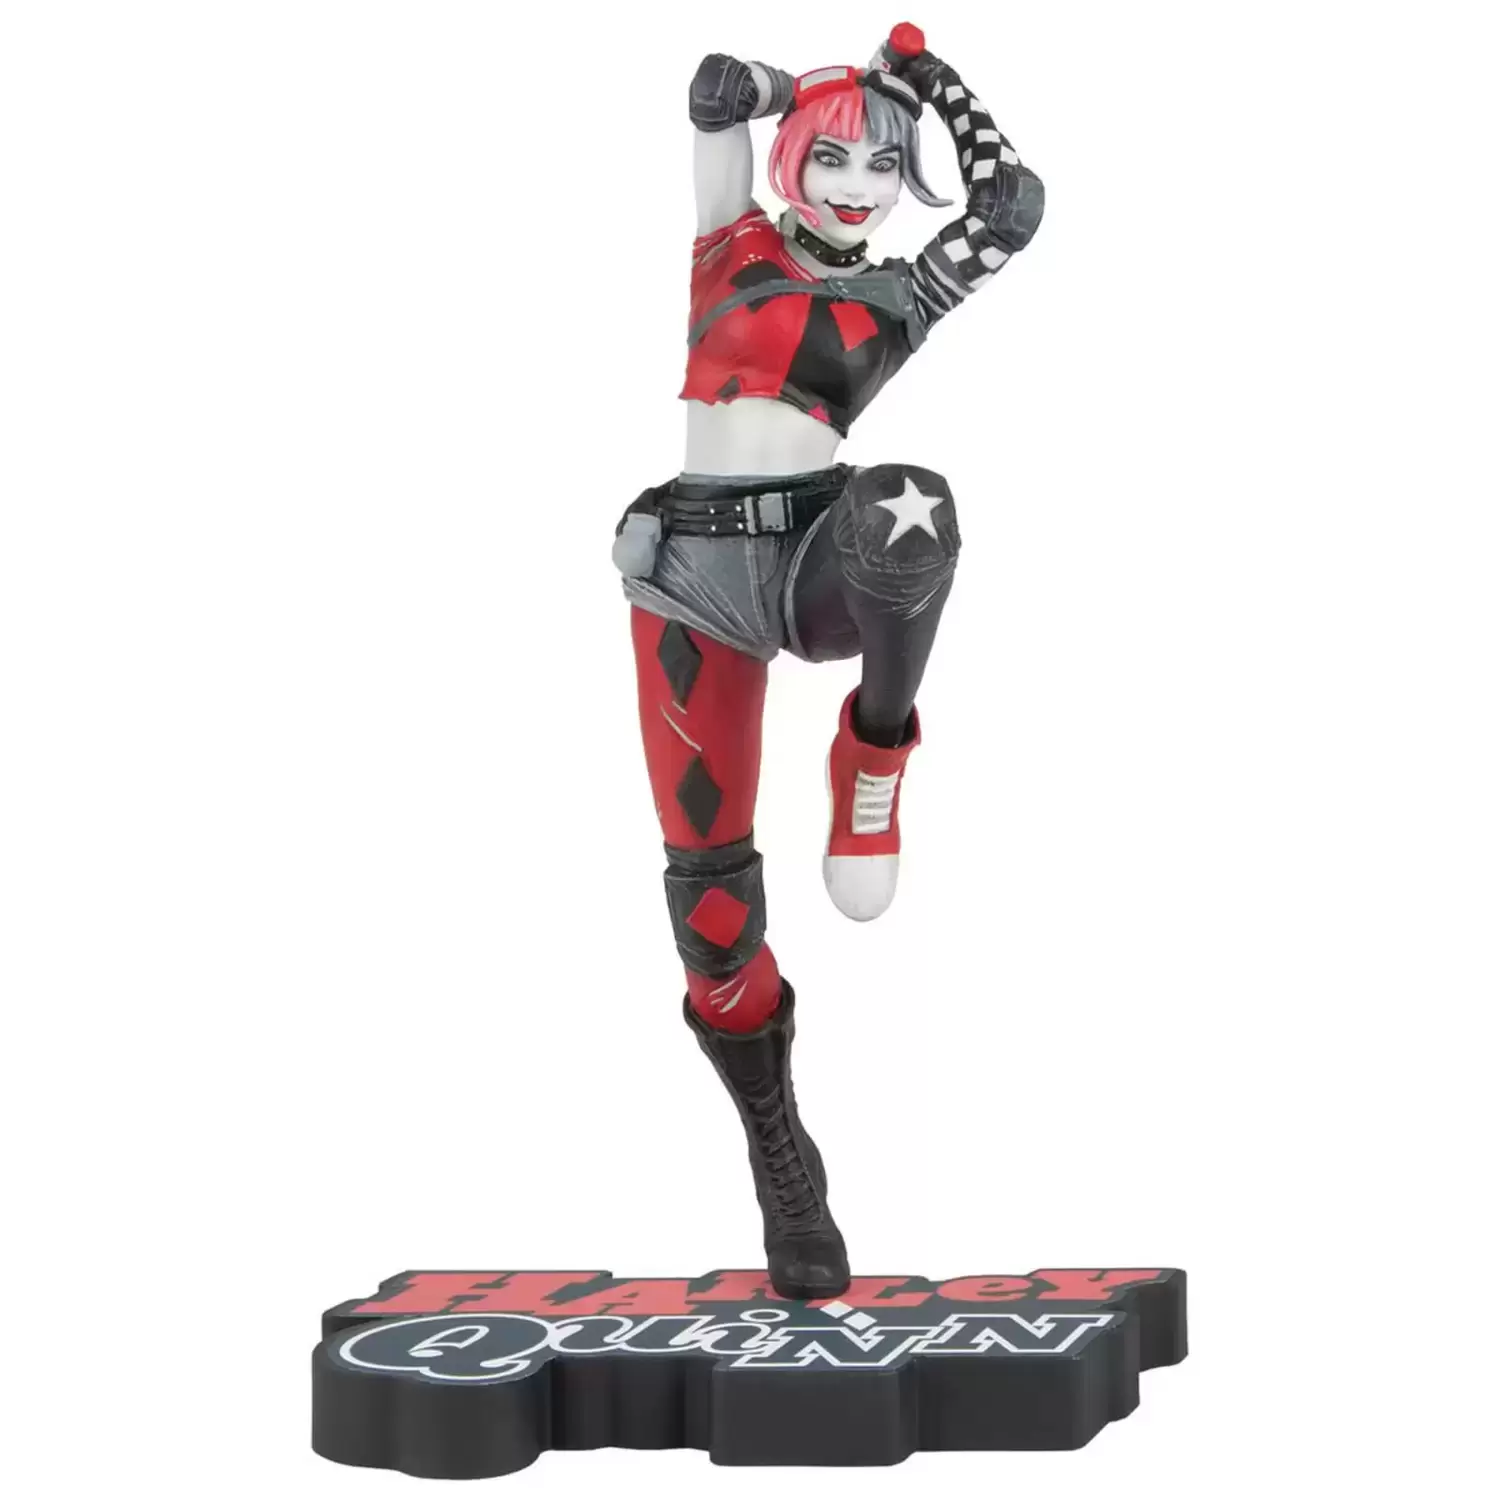 DC Collectibles Statues - Red White & Black Harley Quinn - DC Direct by Derrick Chew